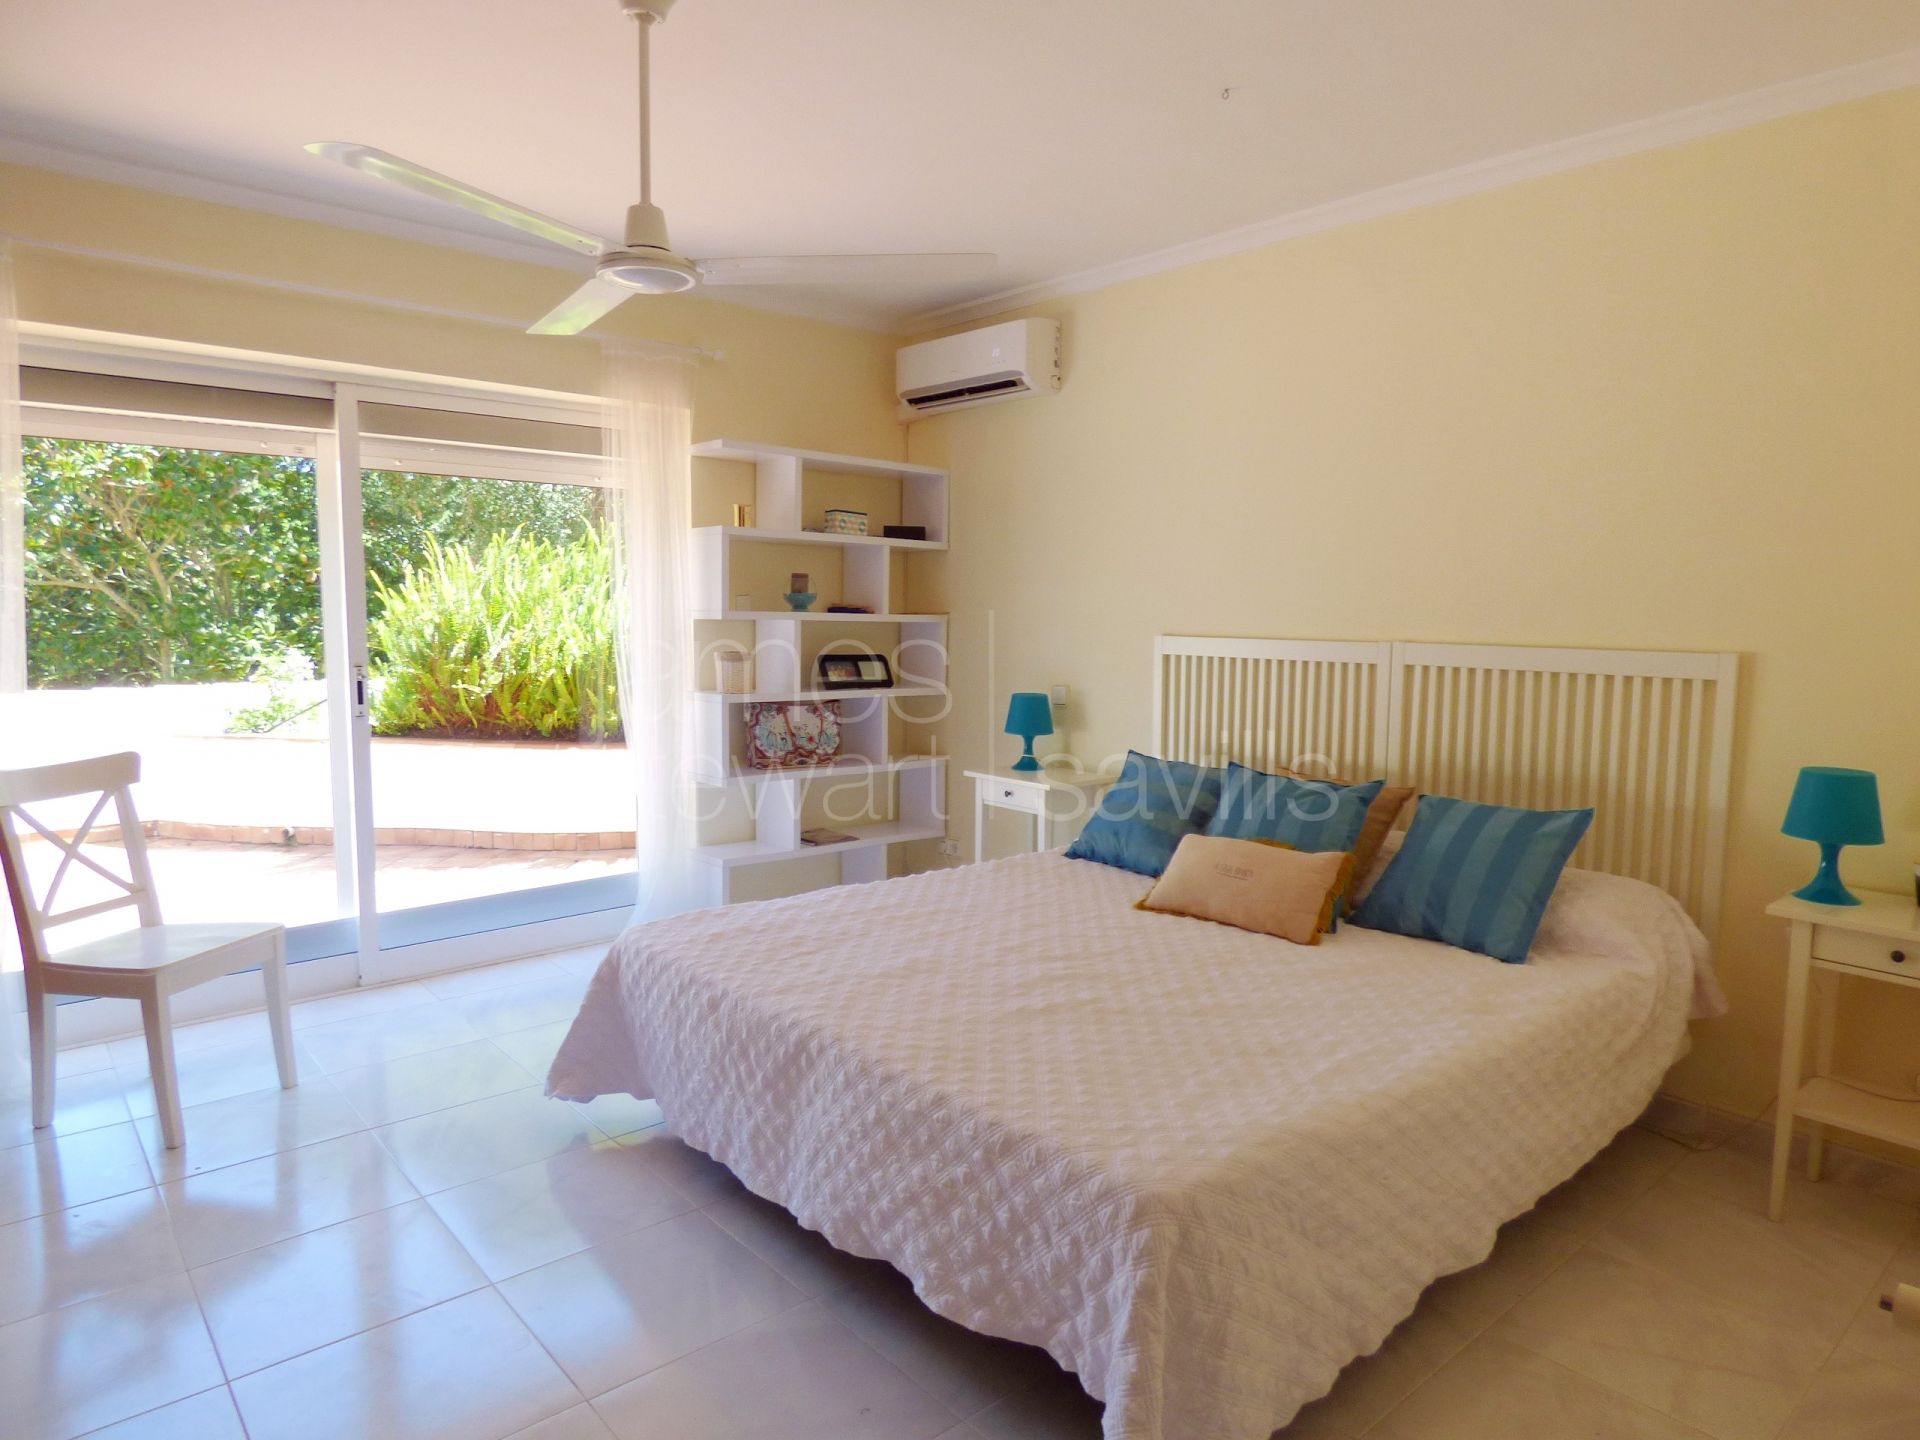 Spacious 3 bedroom villa with guest apartment in the C zone of Sotogrande